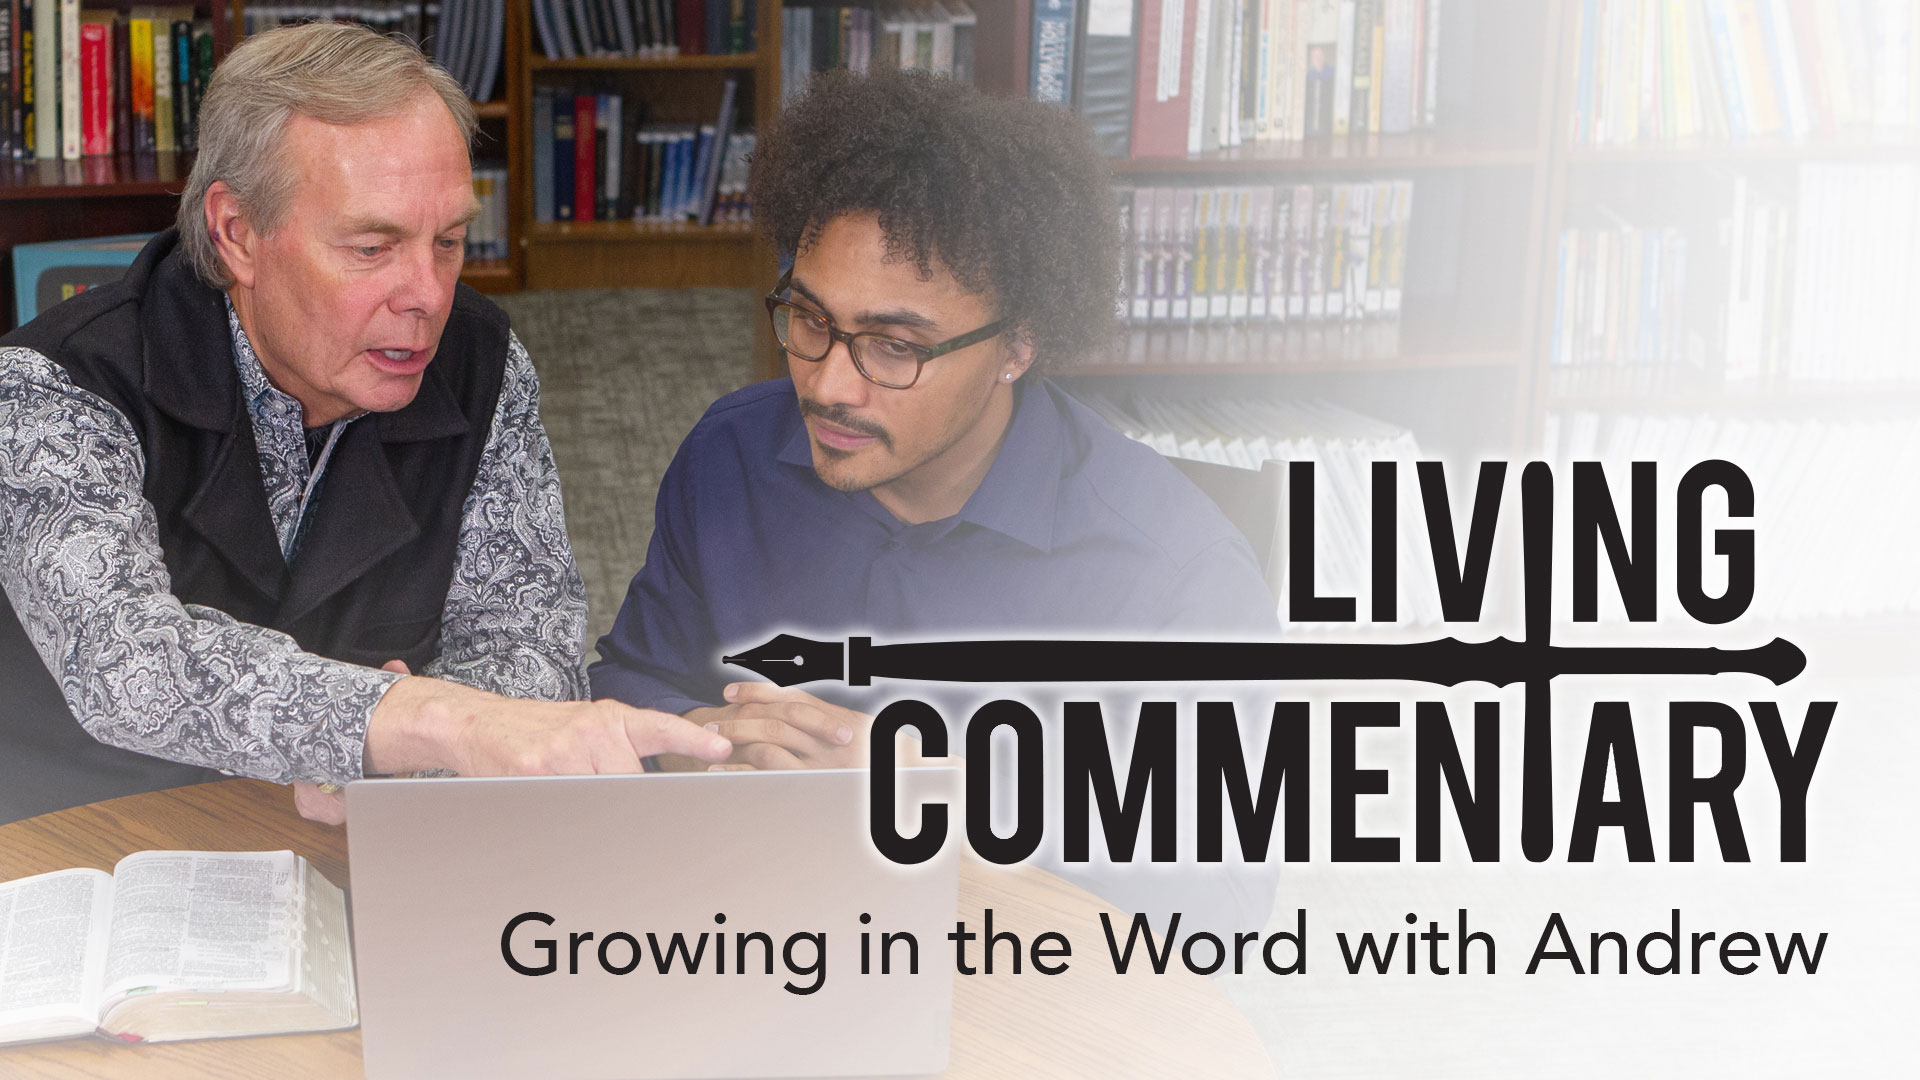 Living Commentary - Growing in the Word with Andrew